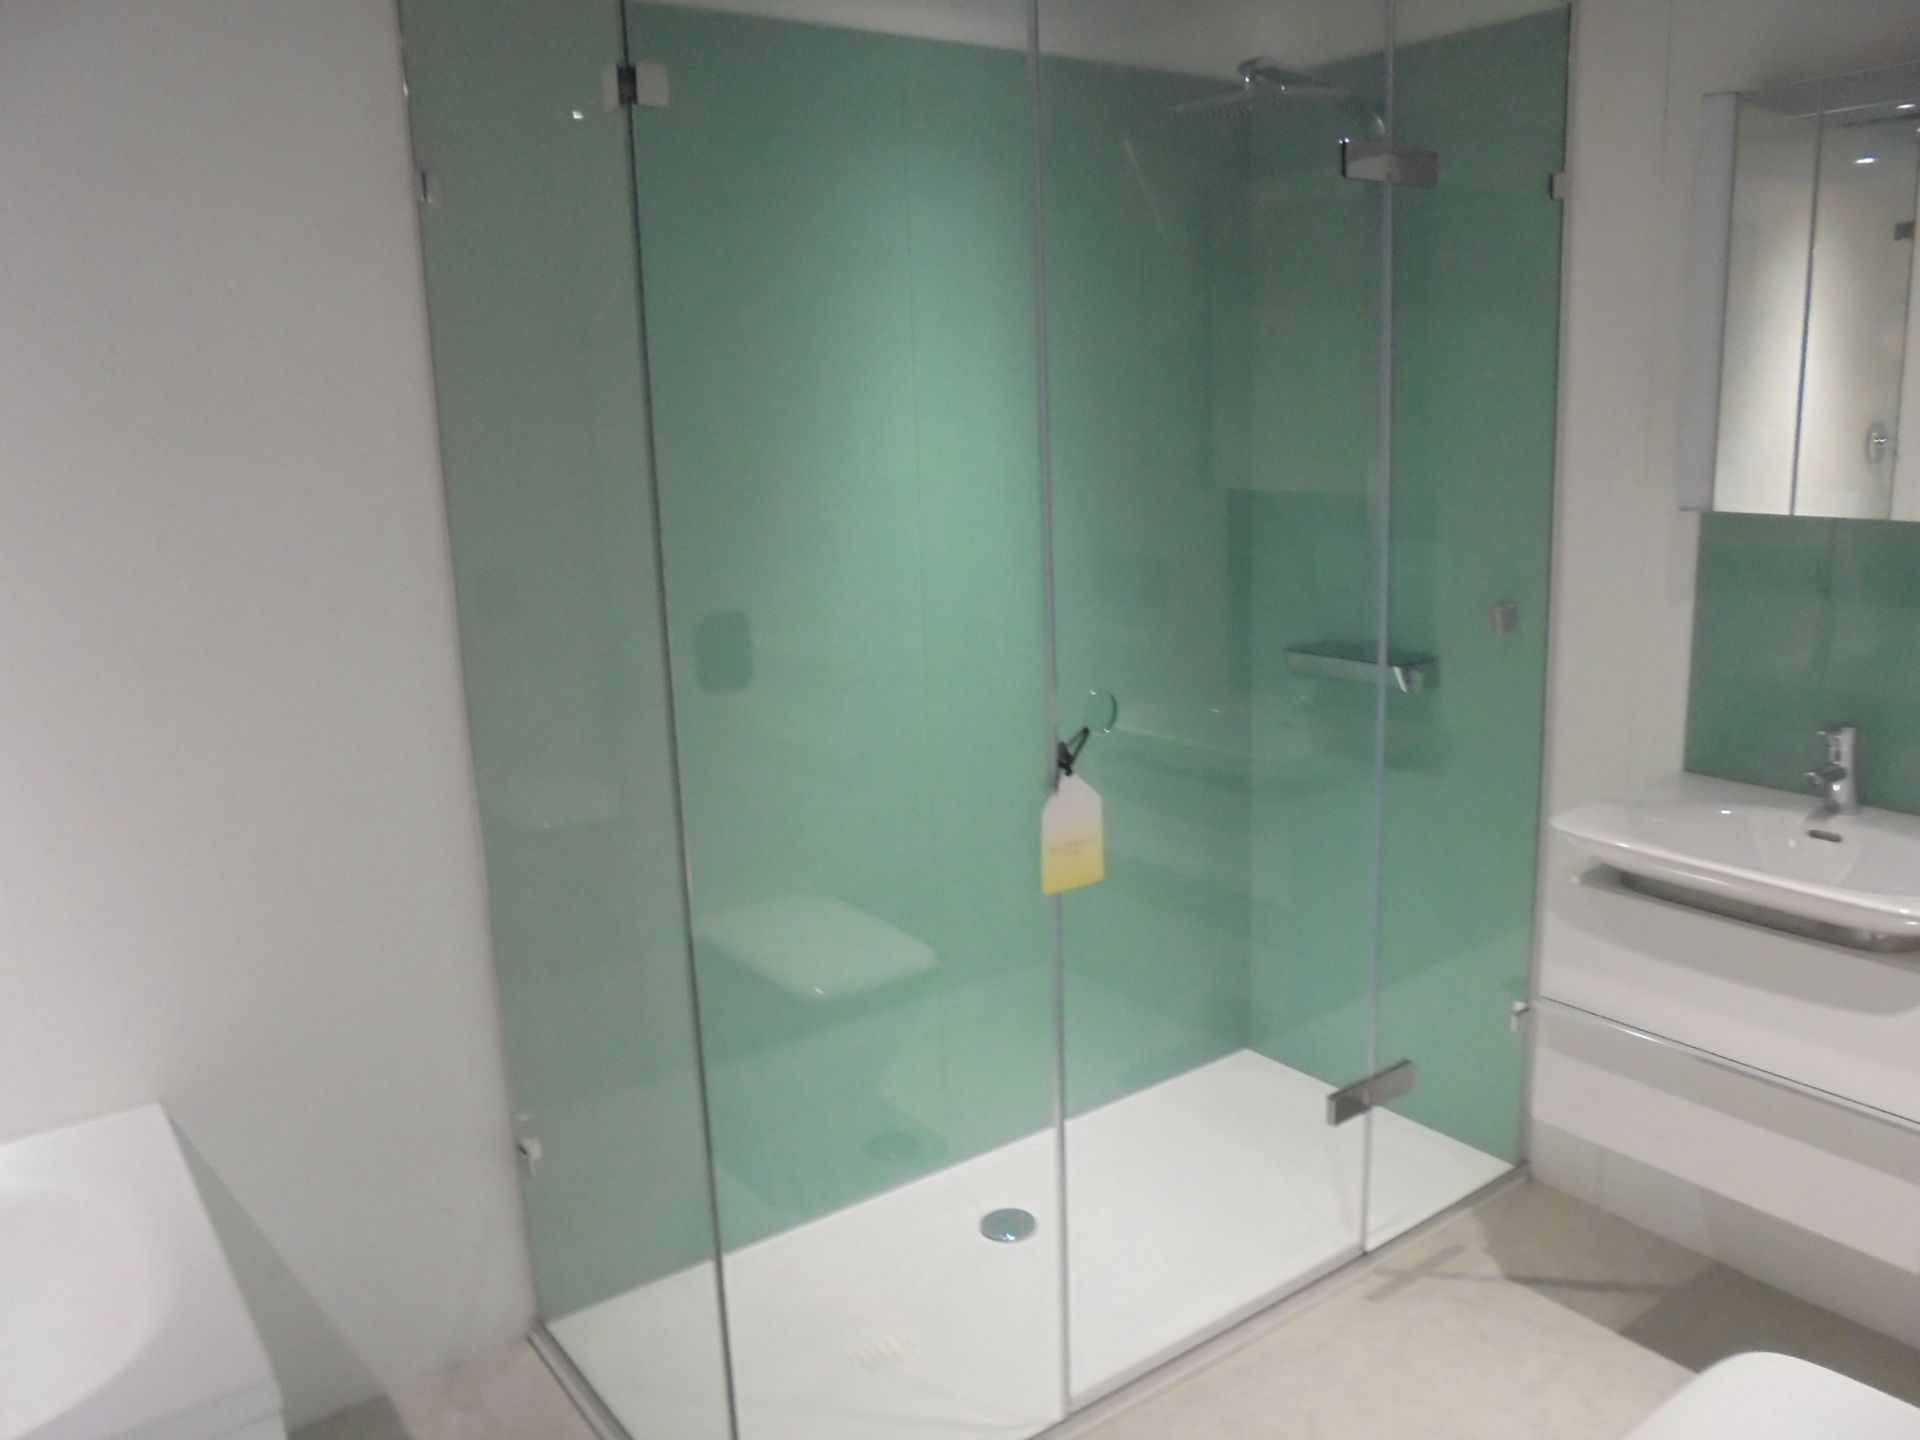 Majestic Frameless Bespoke Seauville Shower Enclosure. Measures: 1792mm x 792mm x 2200mm High, Clear